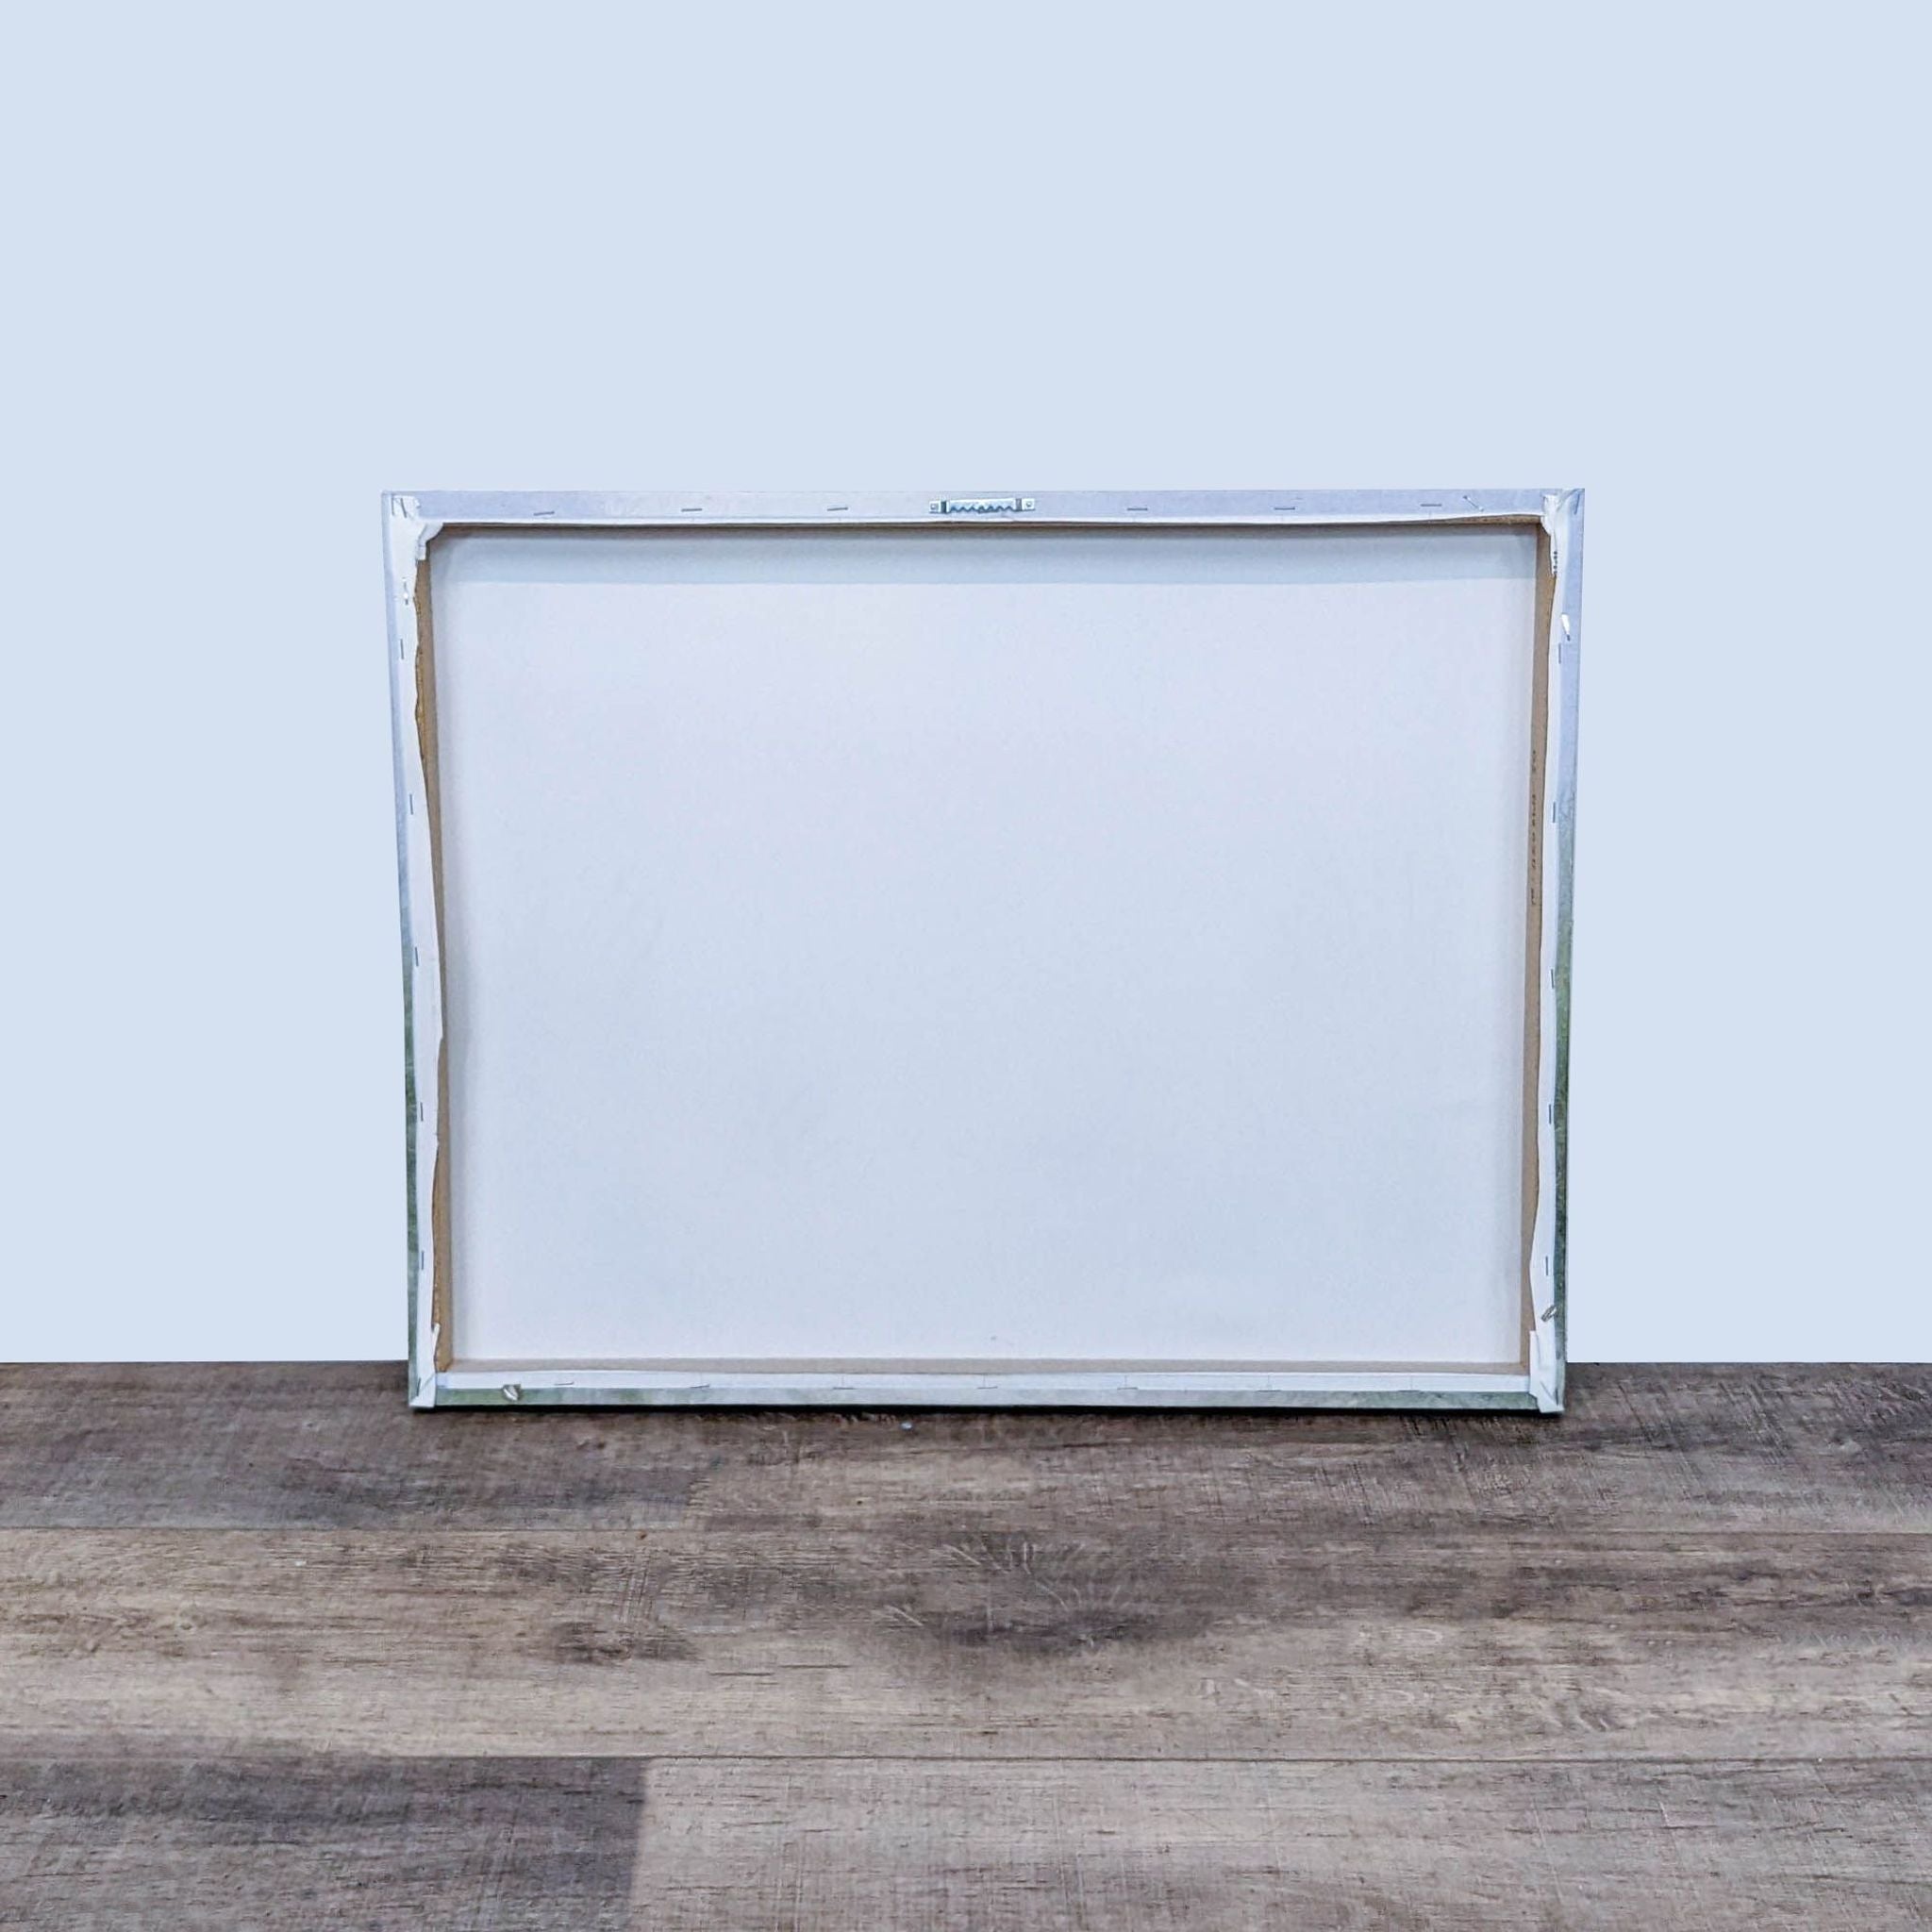 Alt text 2: Back view of a Reperch-branded canvas frame, displaying a blank white canvas and a sticker with product numbers, on a wooden surface.